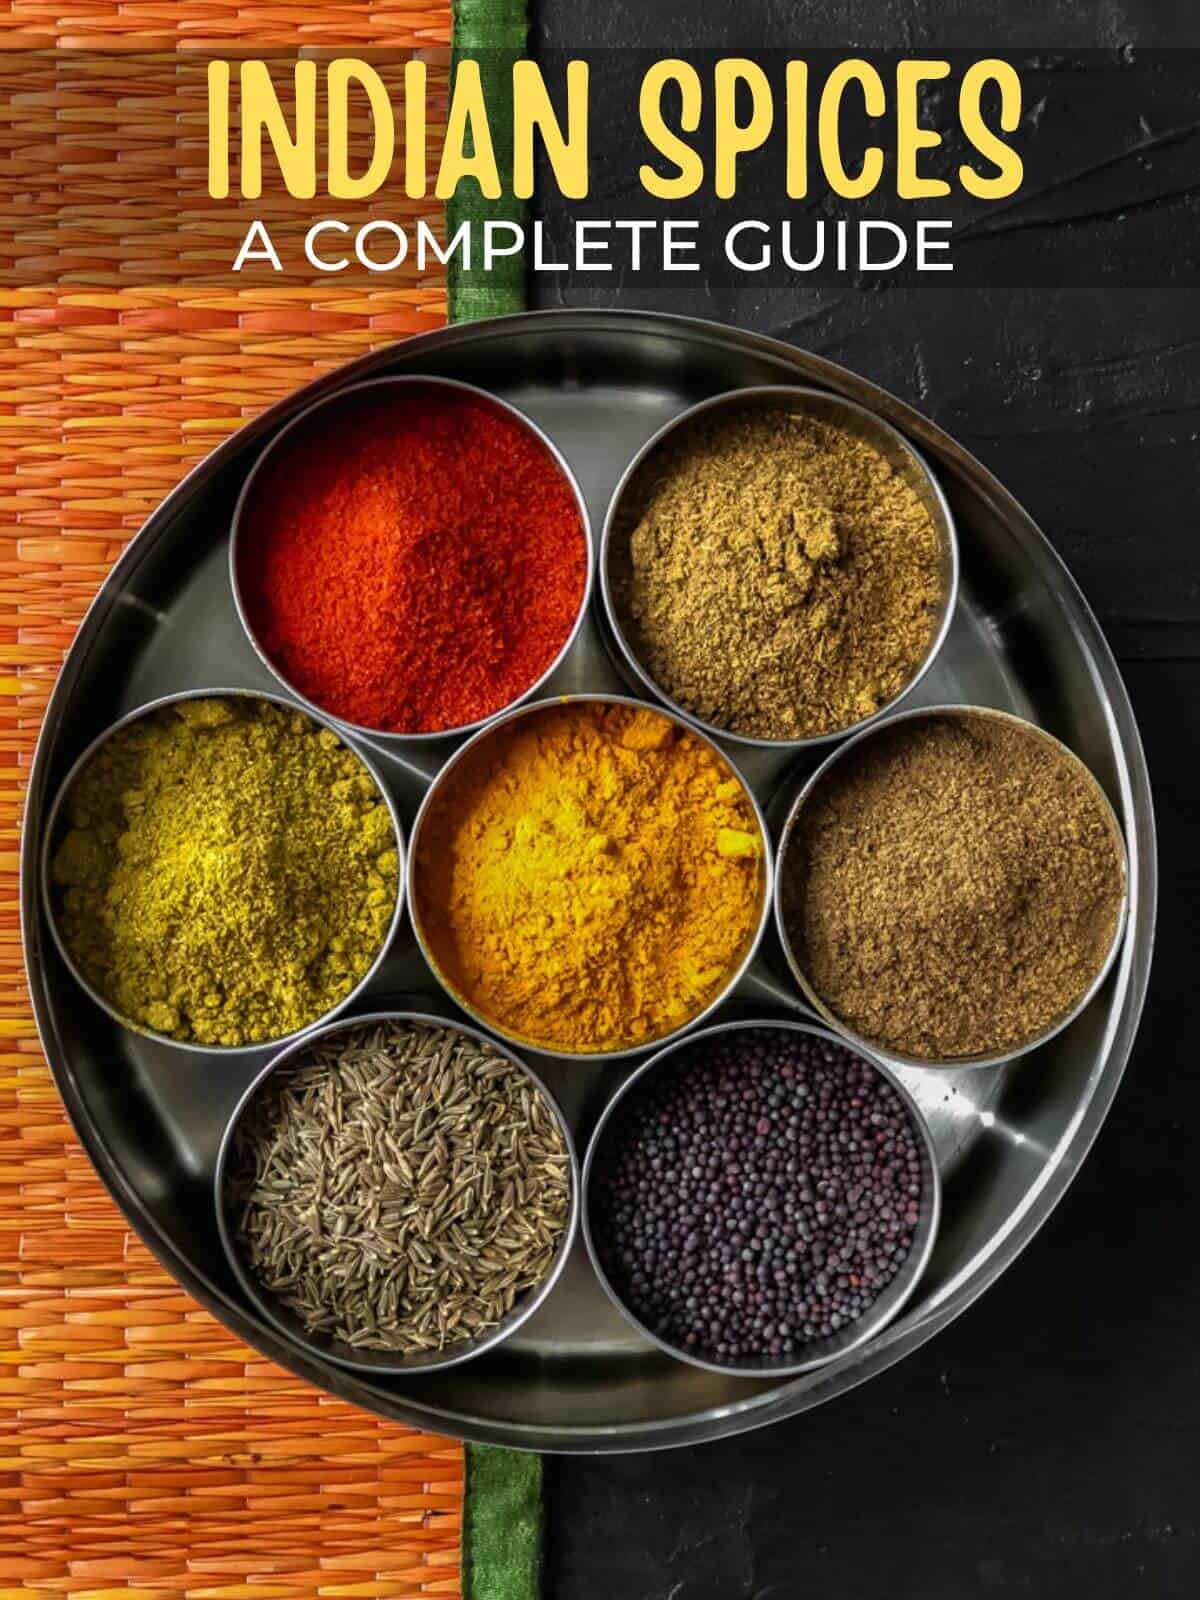 Essential spices in Indian cooking – what to buy and where